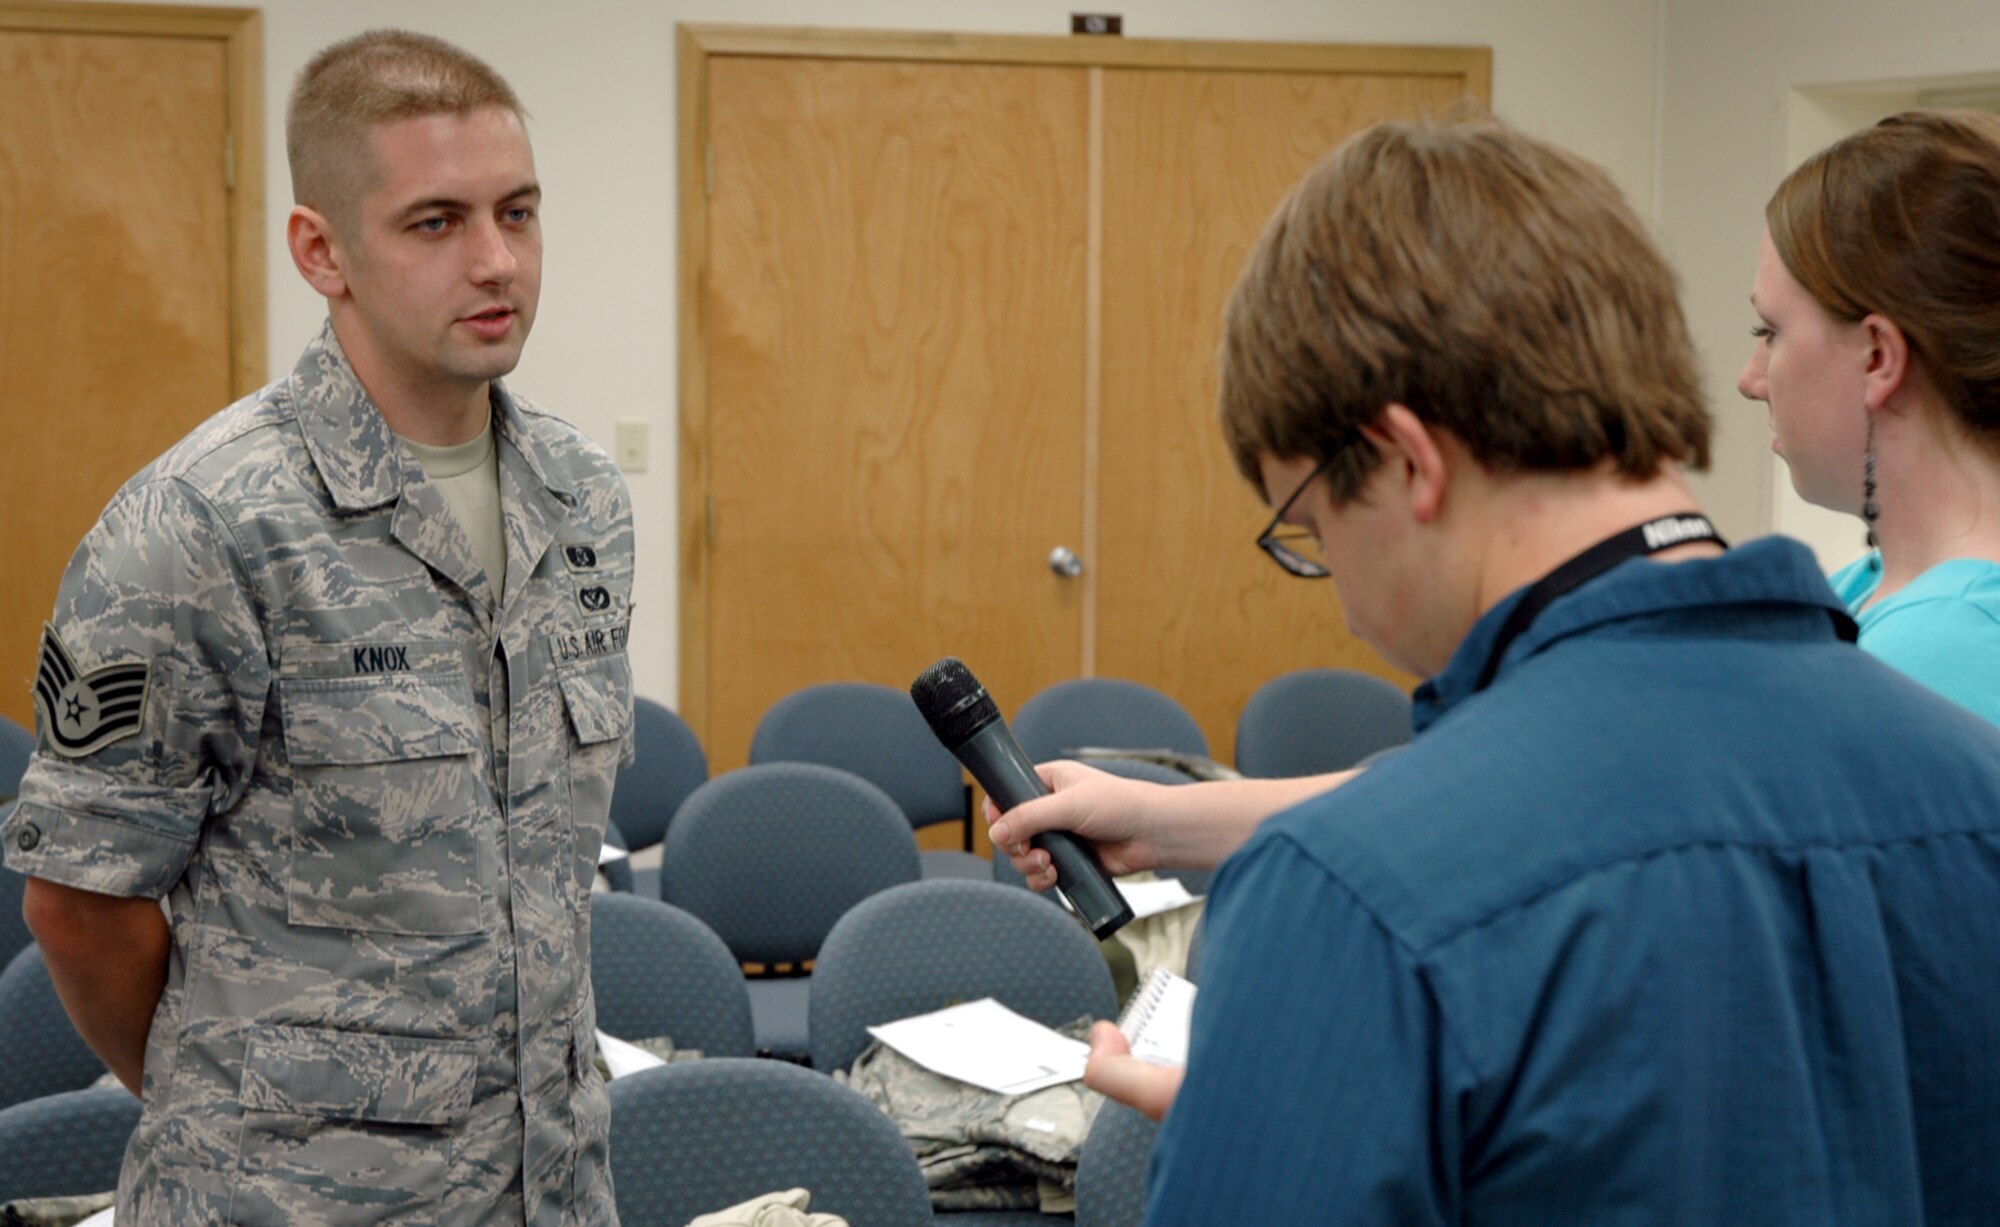 YOUNGSTOWN AIR RESERVE STATION, Ohio -- U.S. Air Force Reservist Staff Sgt. Kyle Knox, an emergency management journeyman assigned to the 910th Civil Engineers Squadron here, is interviewed by local news media at the CE training room here June 29, 2009.  Staff Sgt. Knox is one of approximately 20 CES Reservists that deployed June 29, 2009 to participate in a humanitarian mission in Guyana, South America to build a 2,800 square foot school for the community.  (U.S. Air Force photo by Airman Megan Tomkins) 